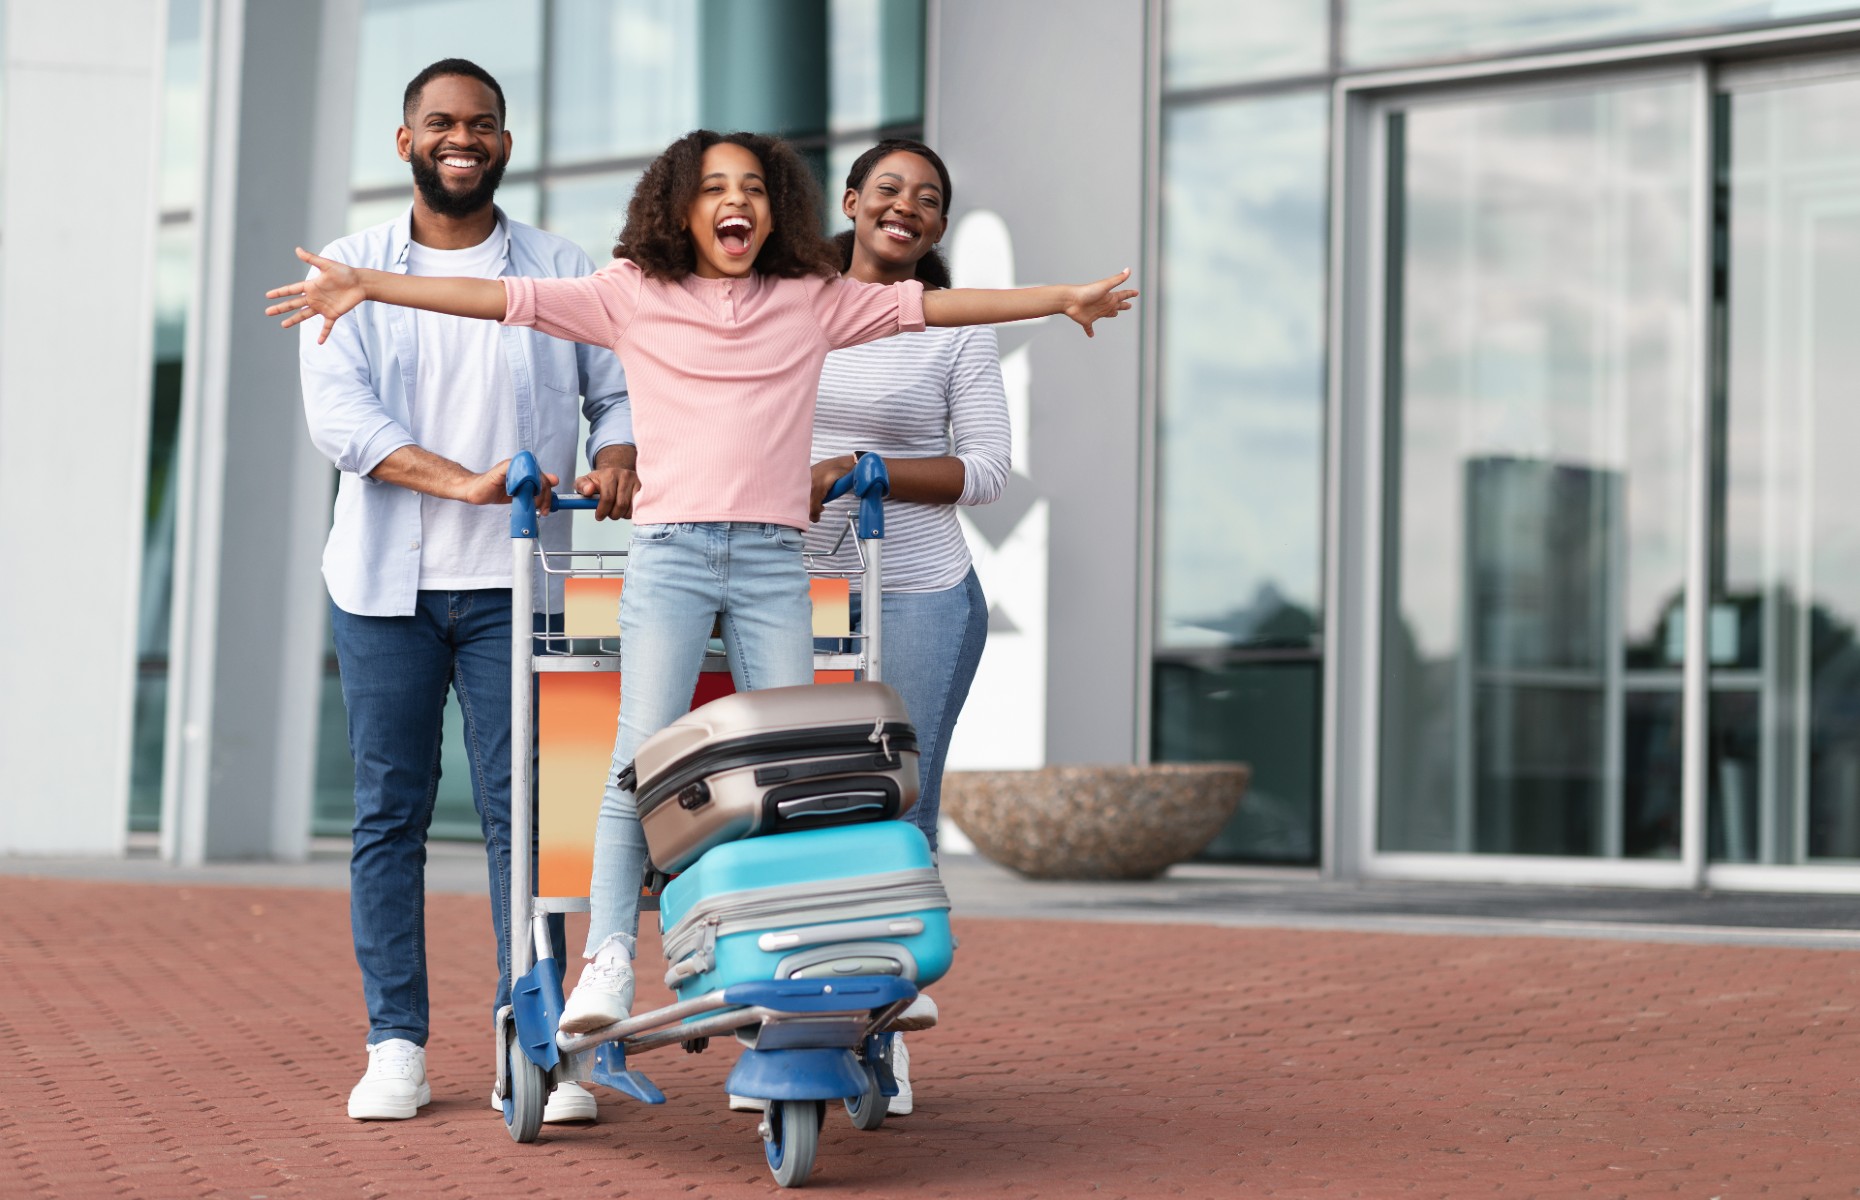 Excited passengers at the airport (Image: Prostock-studio/Shutterstock)